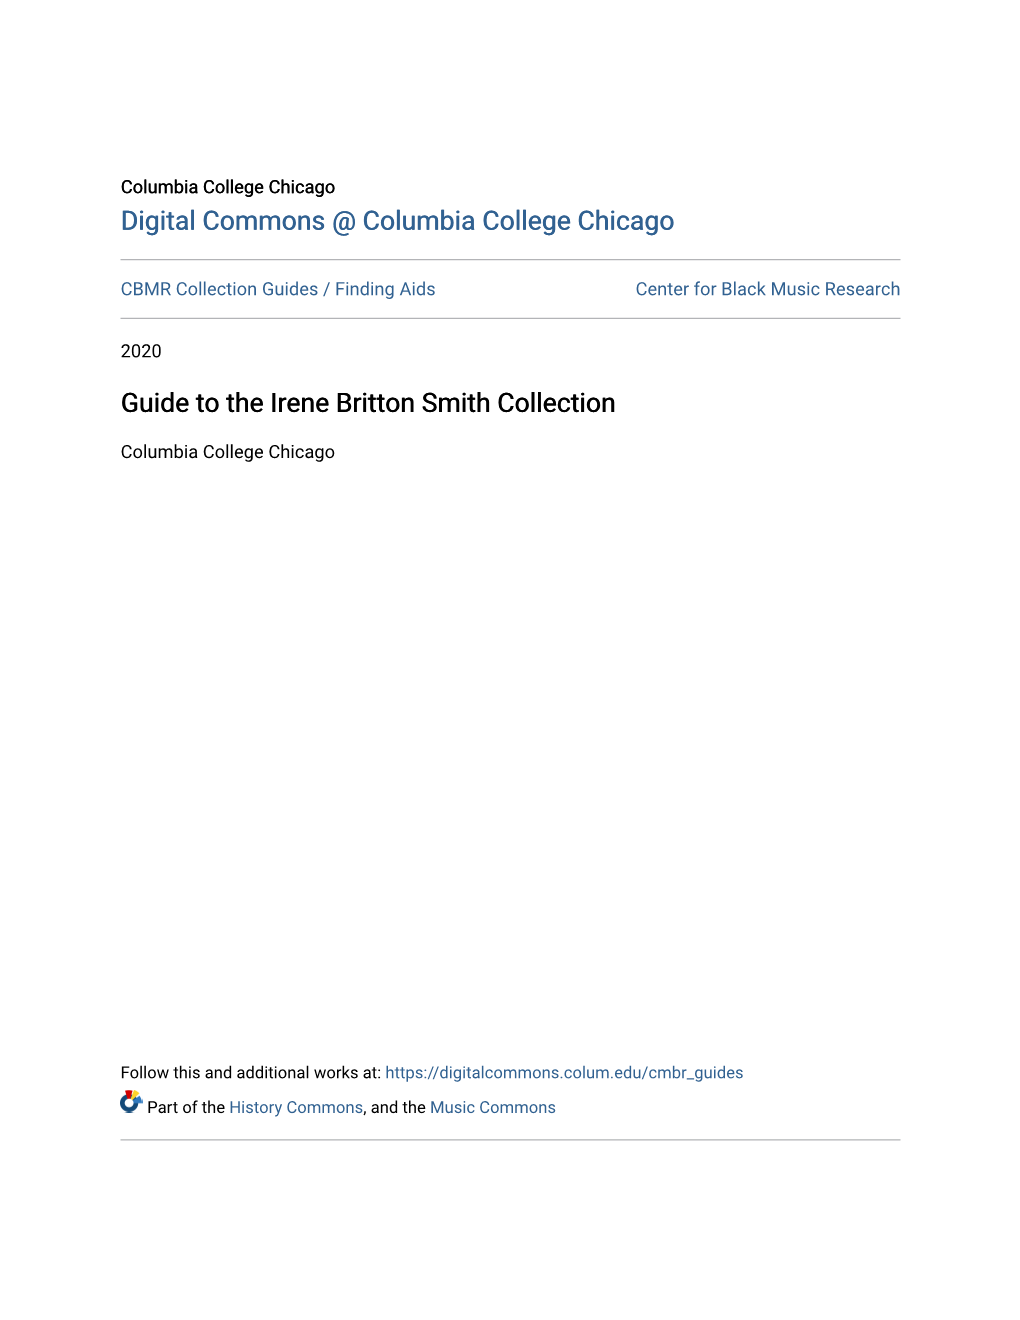 Guide to the Irene Britton Smith Collection